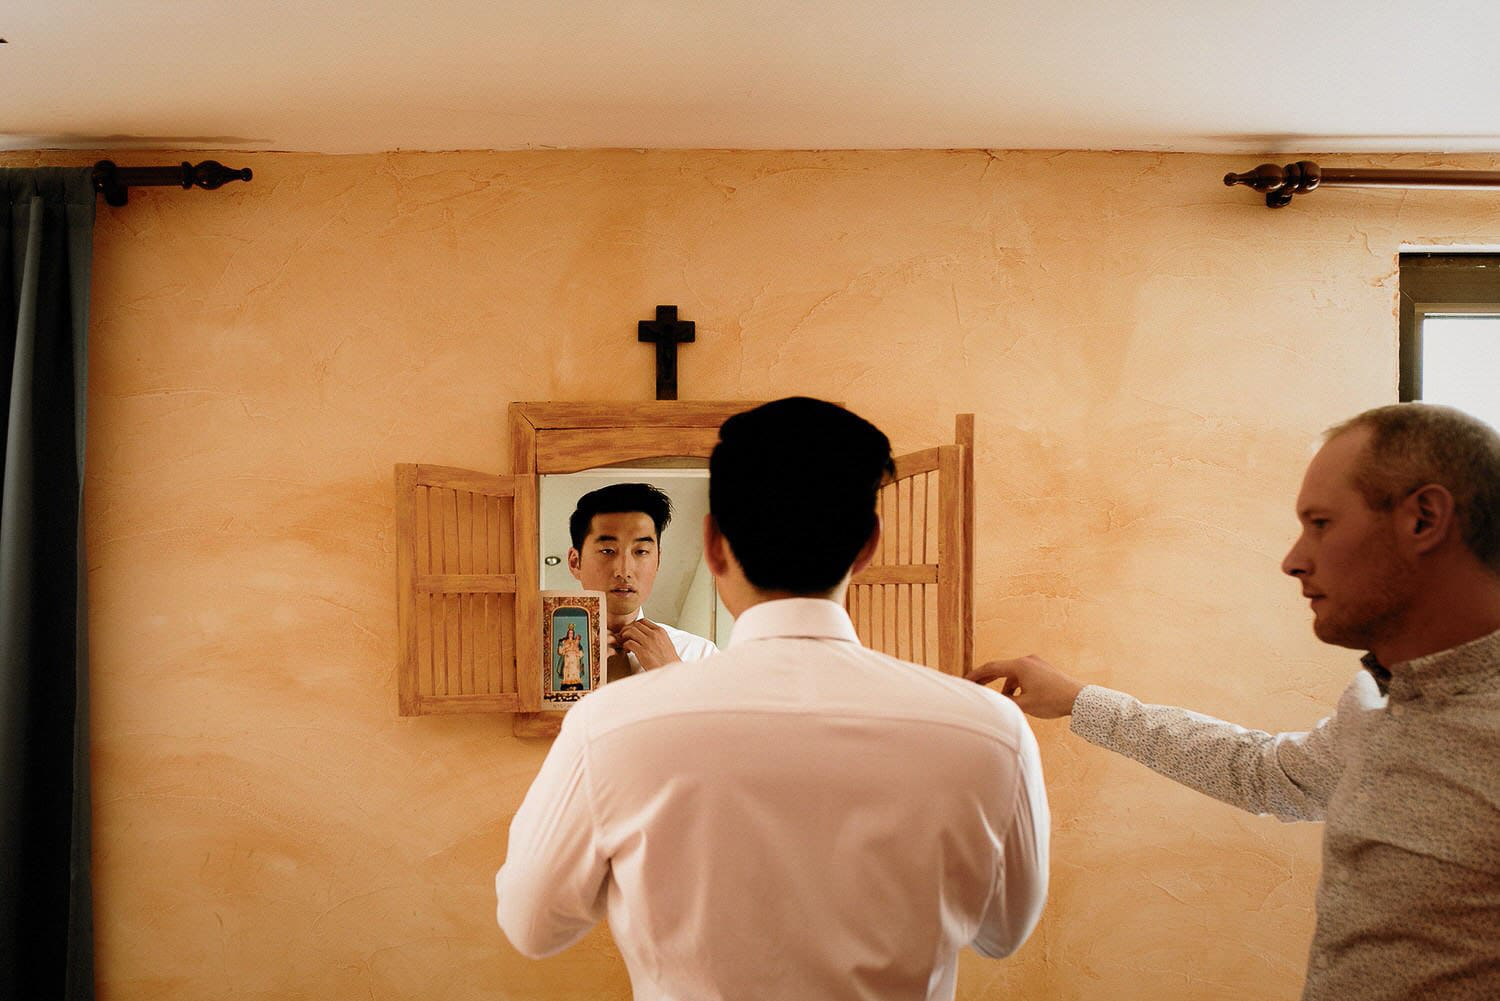 Charming Destination Wedding in the Portuguese Countryside - groom getting ready and looking in the mirror as he puts his tie on inside a rustic orange room